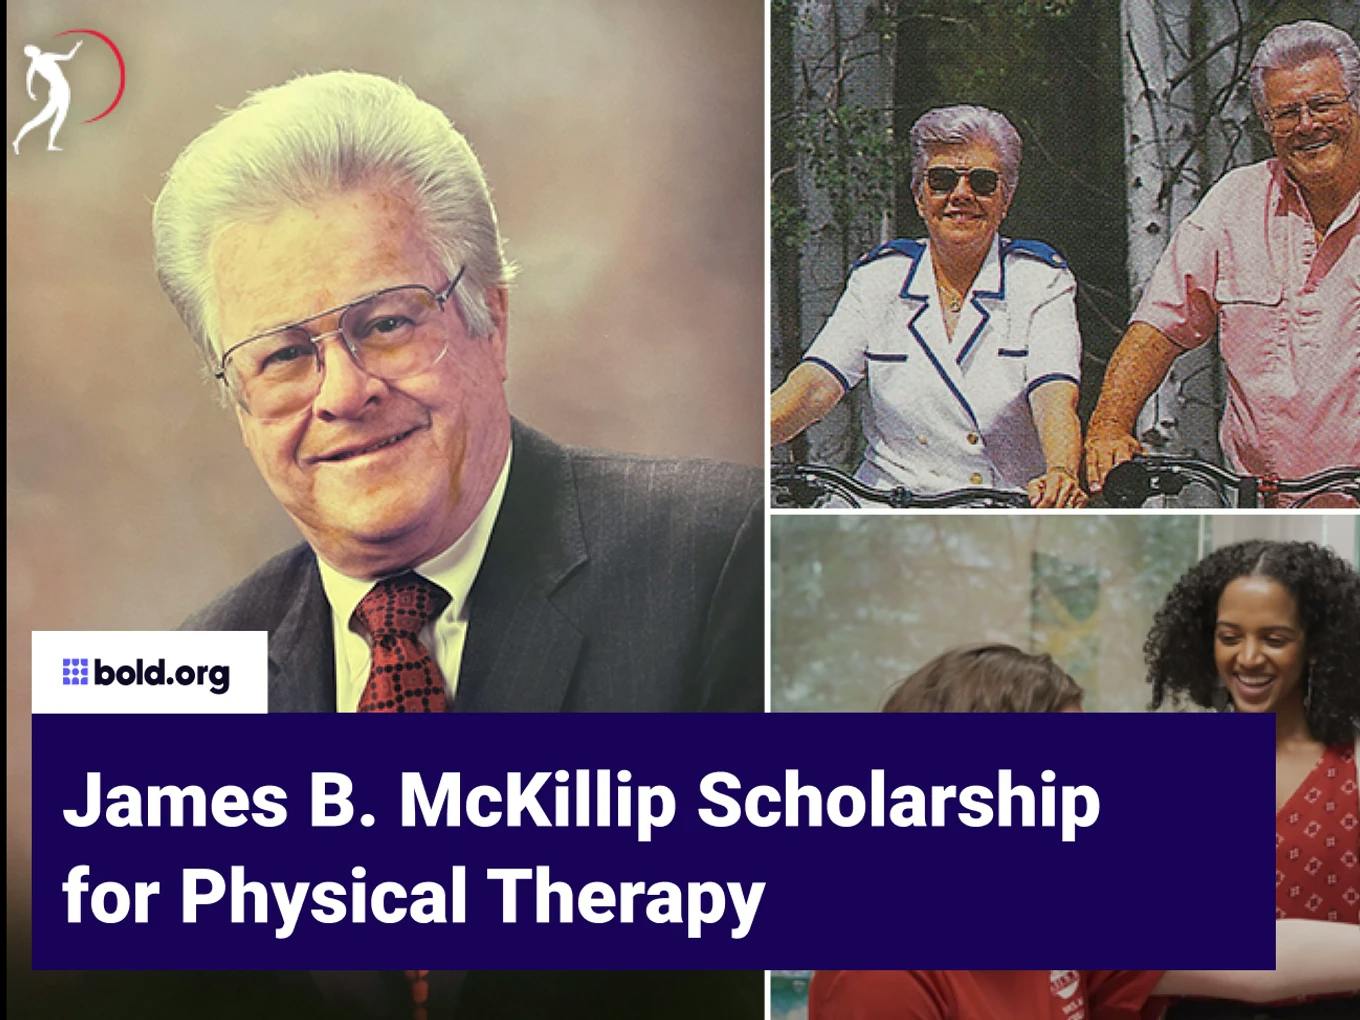 James B. McKillip Scholarship for Physical Therapy